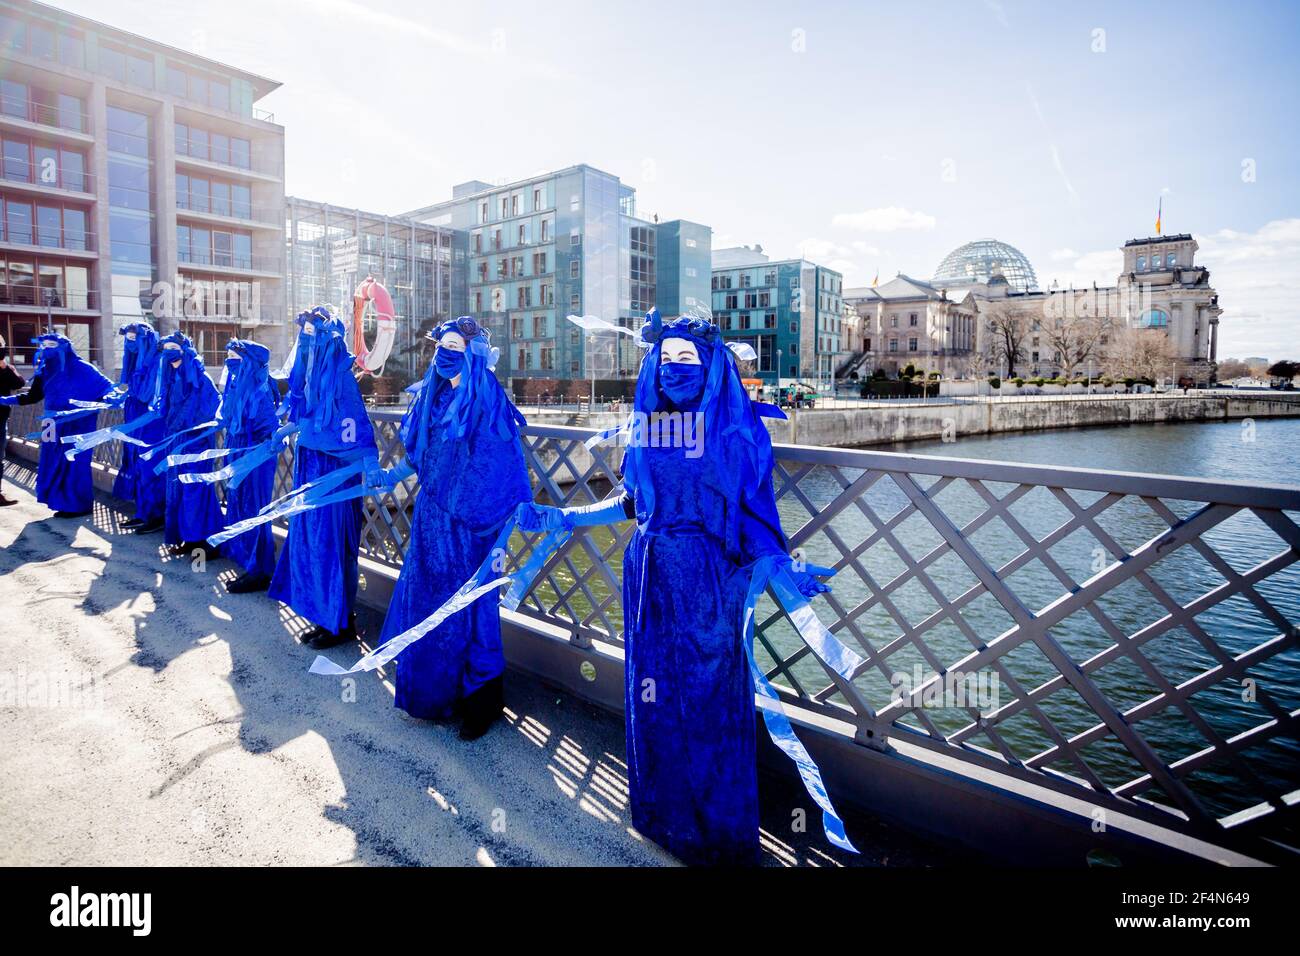 Berlin, Germany. 22nd Mar, 2021. People dressed as 'Blue Rebels' stand on the Marschall Bridge during a performance of the environmental protection movement 'Extinction Rebellion' on the occasion of World Water Day under the motto 'Protect water - stop fracking worldwide'; the Reichstag building can be seen in the background. Credit: Christoph Soeder/dpa/Alamy Live News Stock Photo